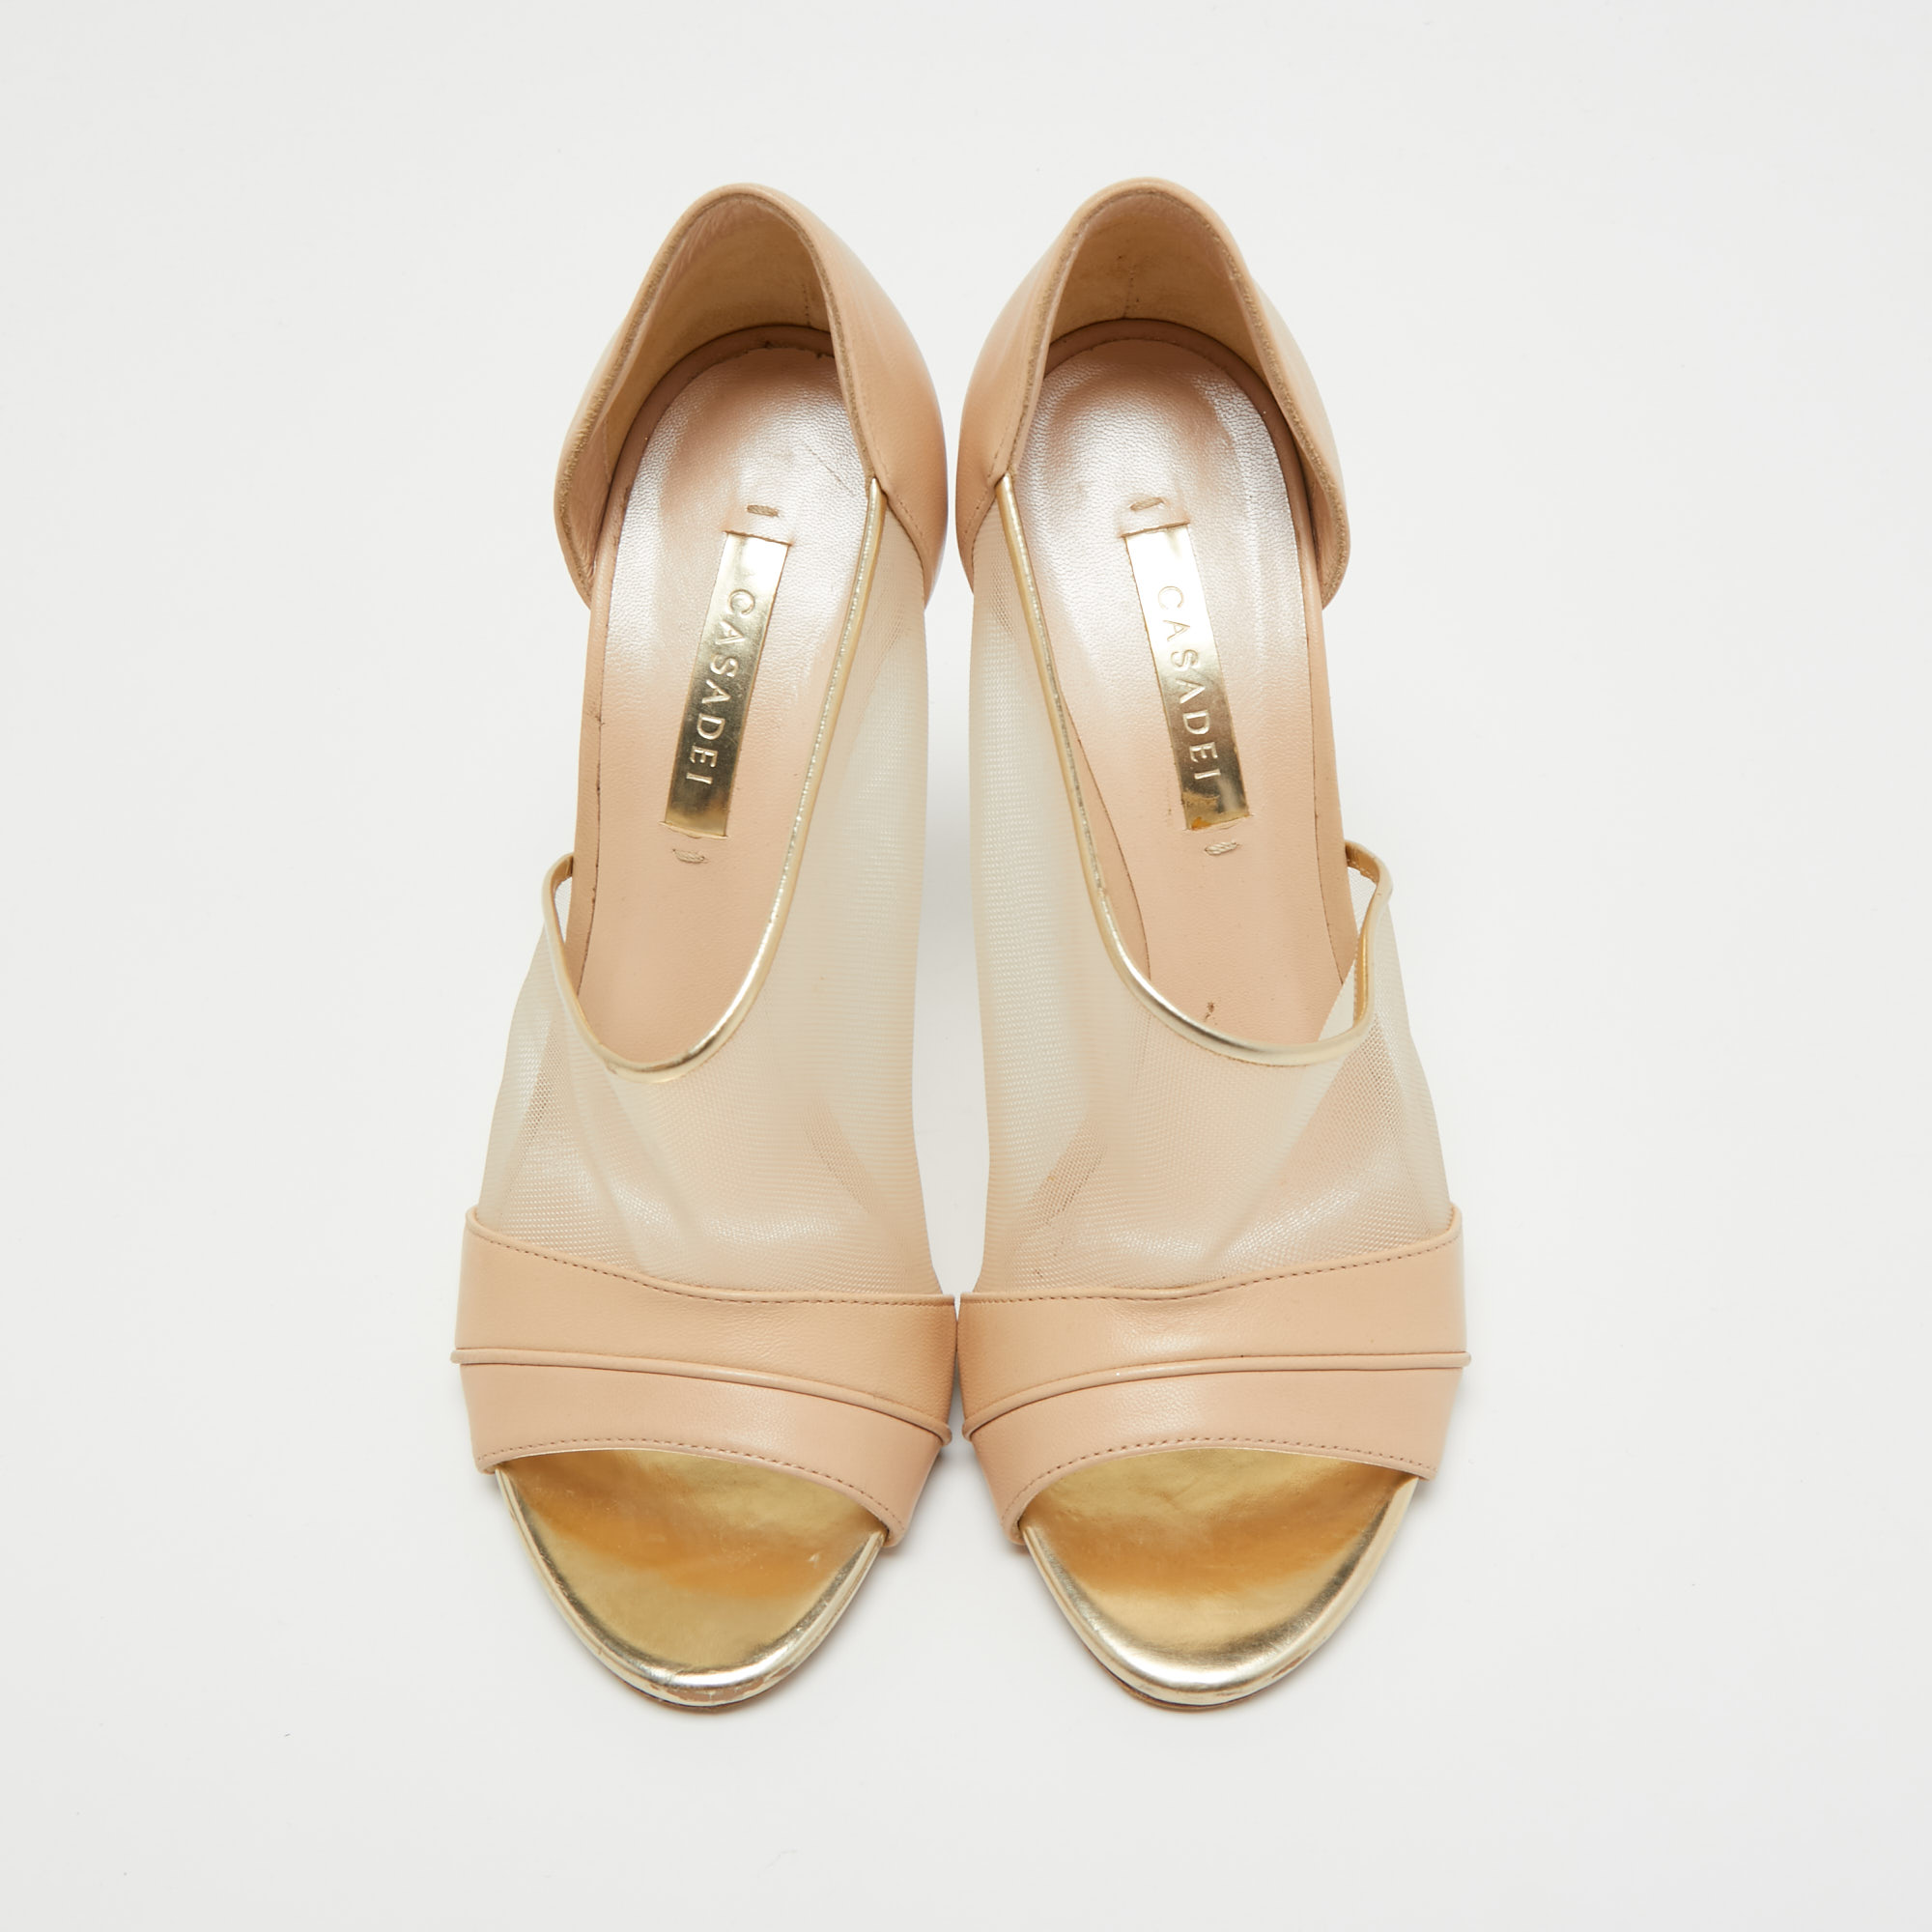 Casadei Beige Leather And Mesh D'orsay Pumps Size 36